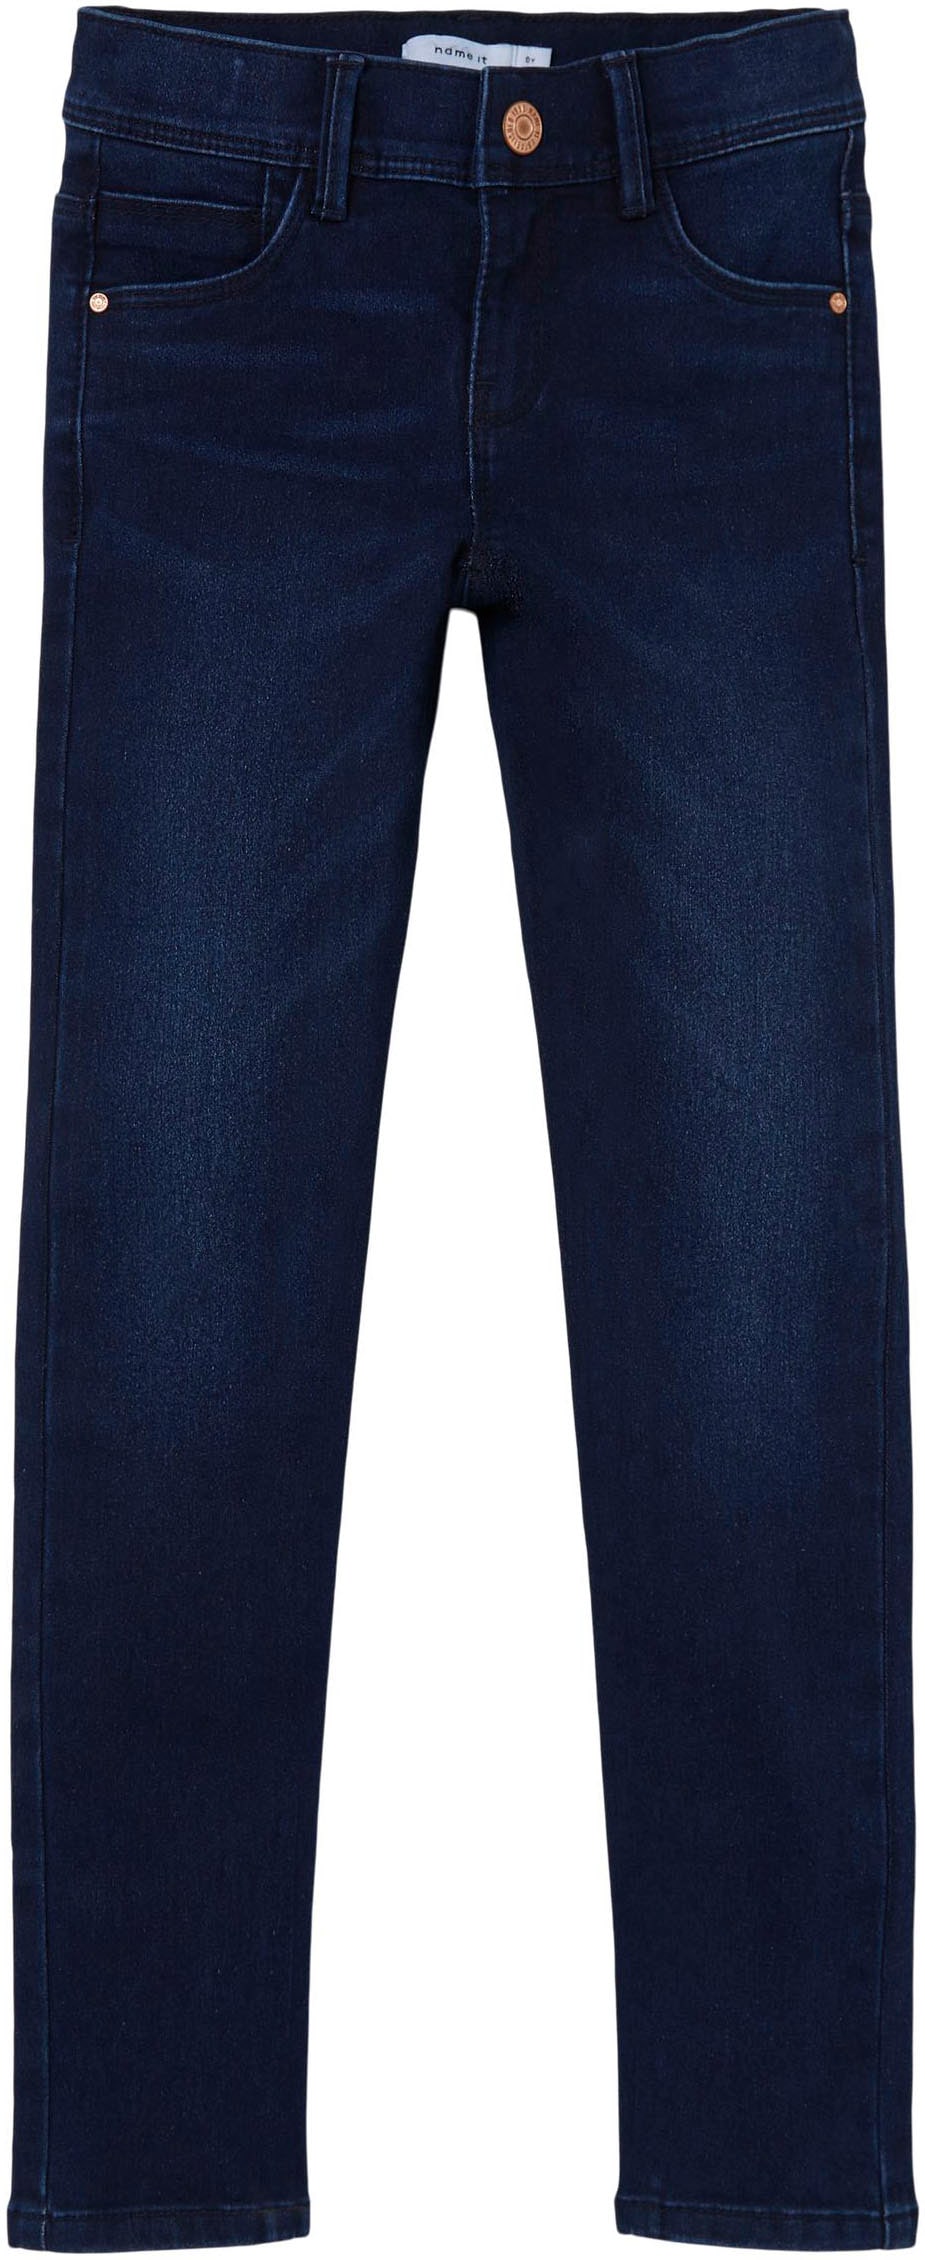 ♕ PANT«, »NKFPOLLY Name DNMTAX bei Stretch-Jeans aus It Stretchdenim bequemem